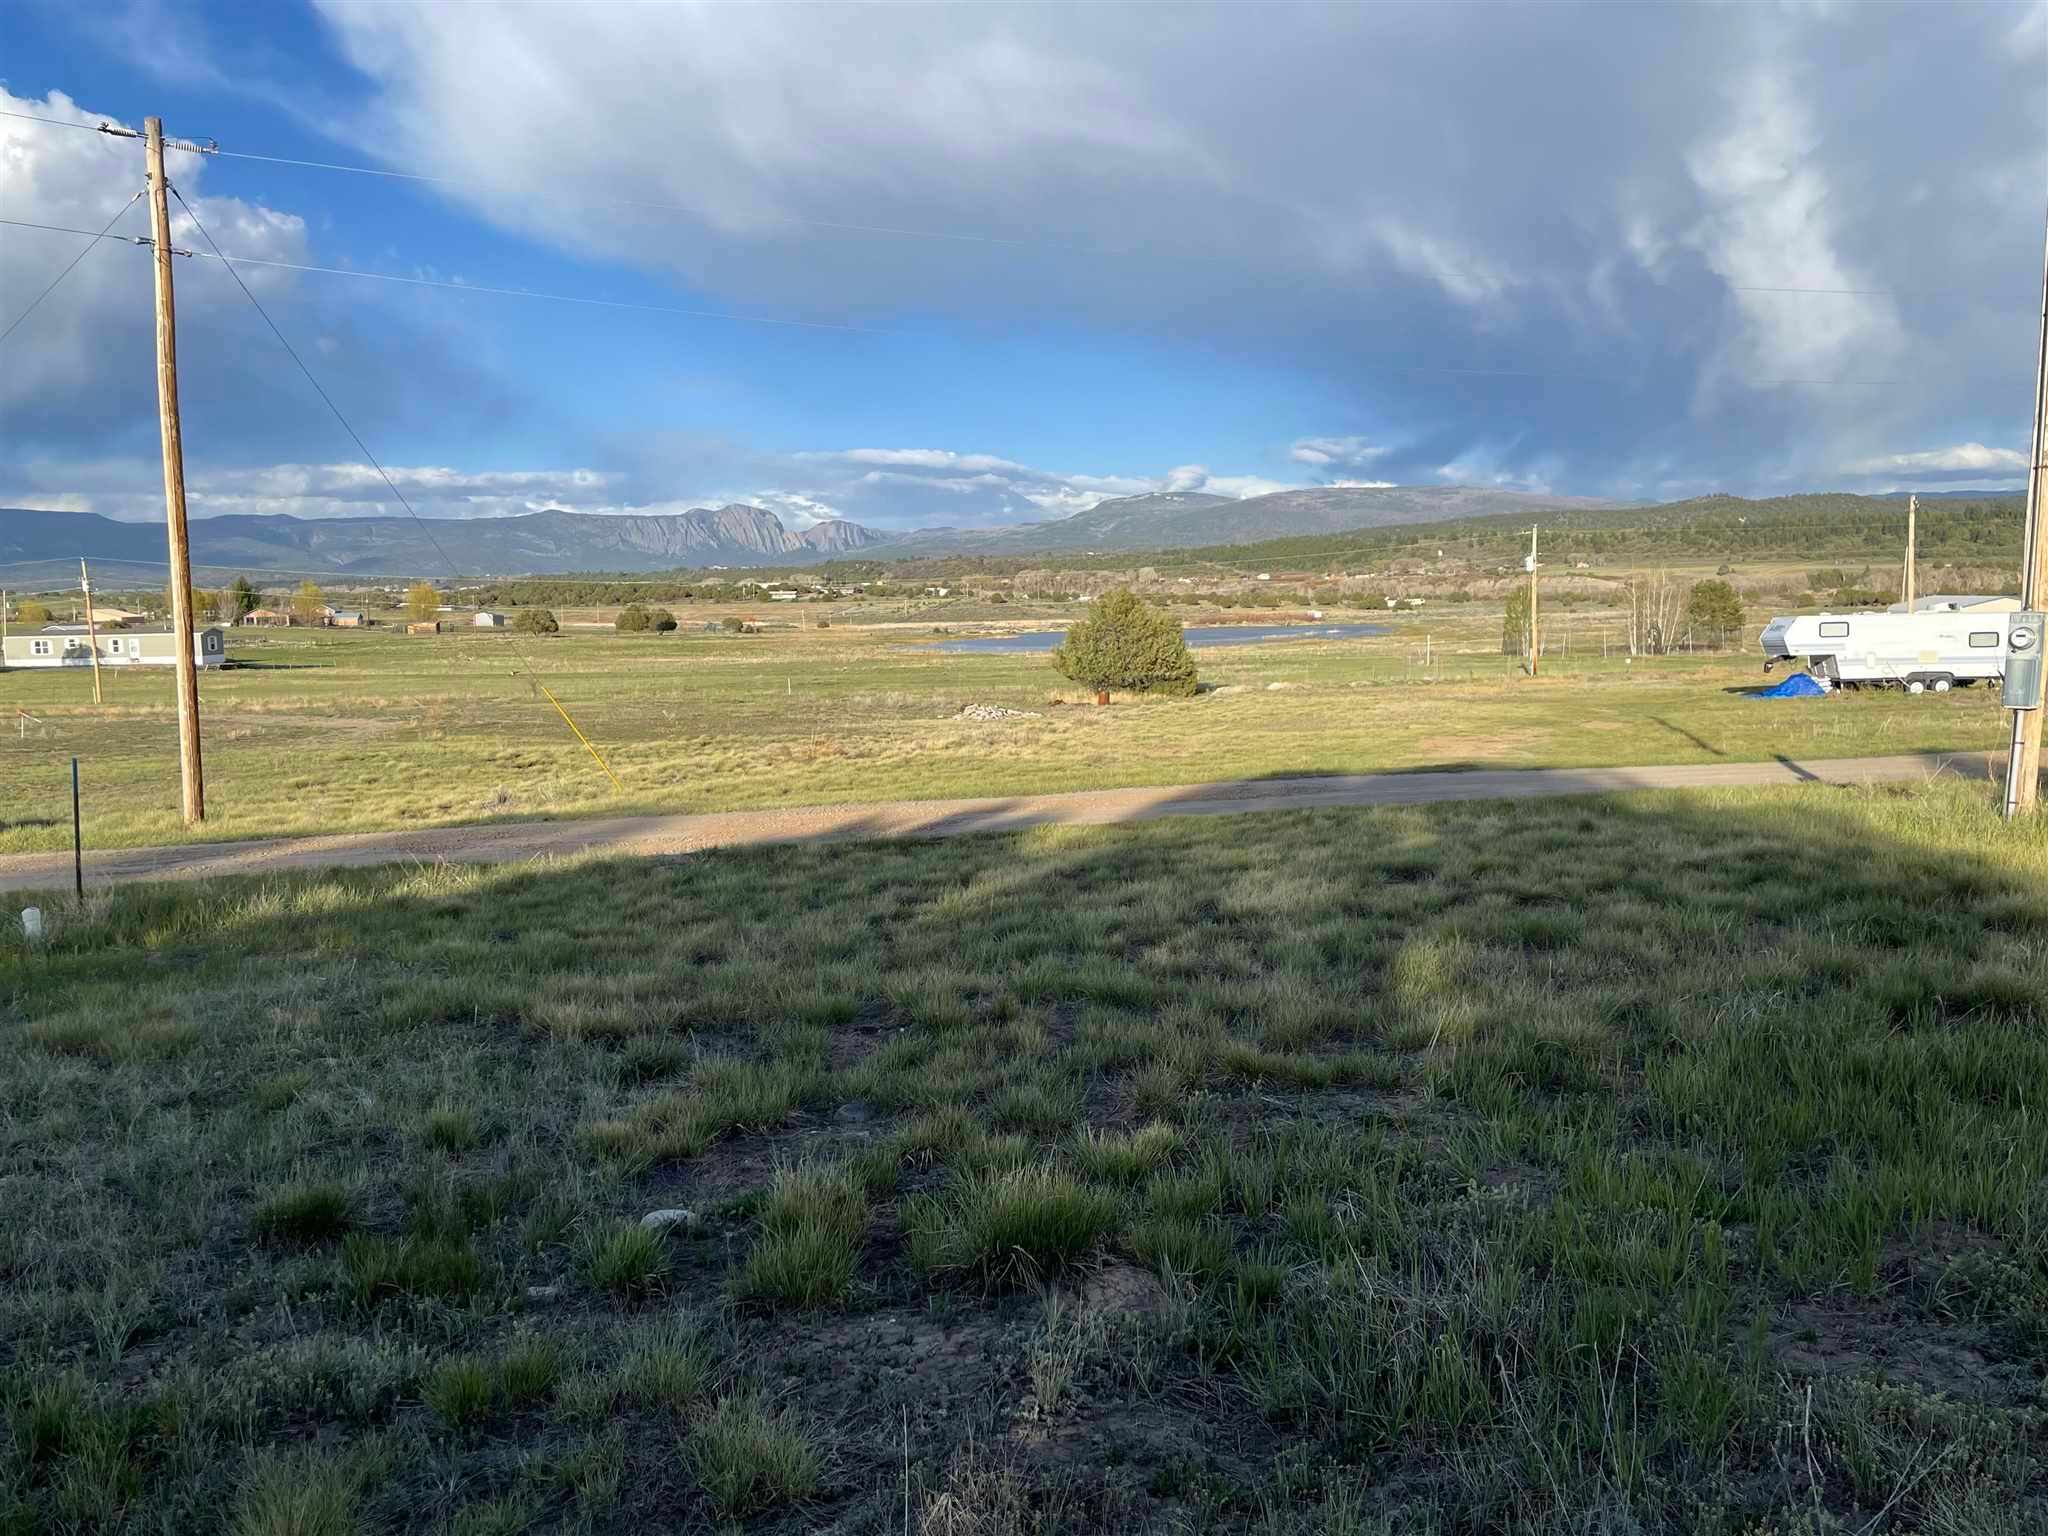 493 NM HWY 95, Rutheron, New Mexico 87551, ,Land,For Sale,493 NM HWY 95,202101928